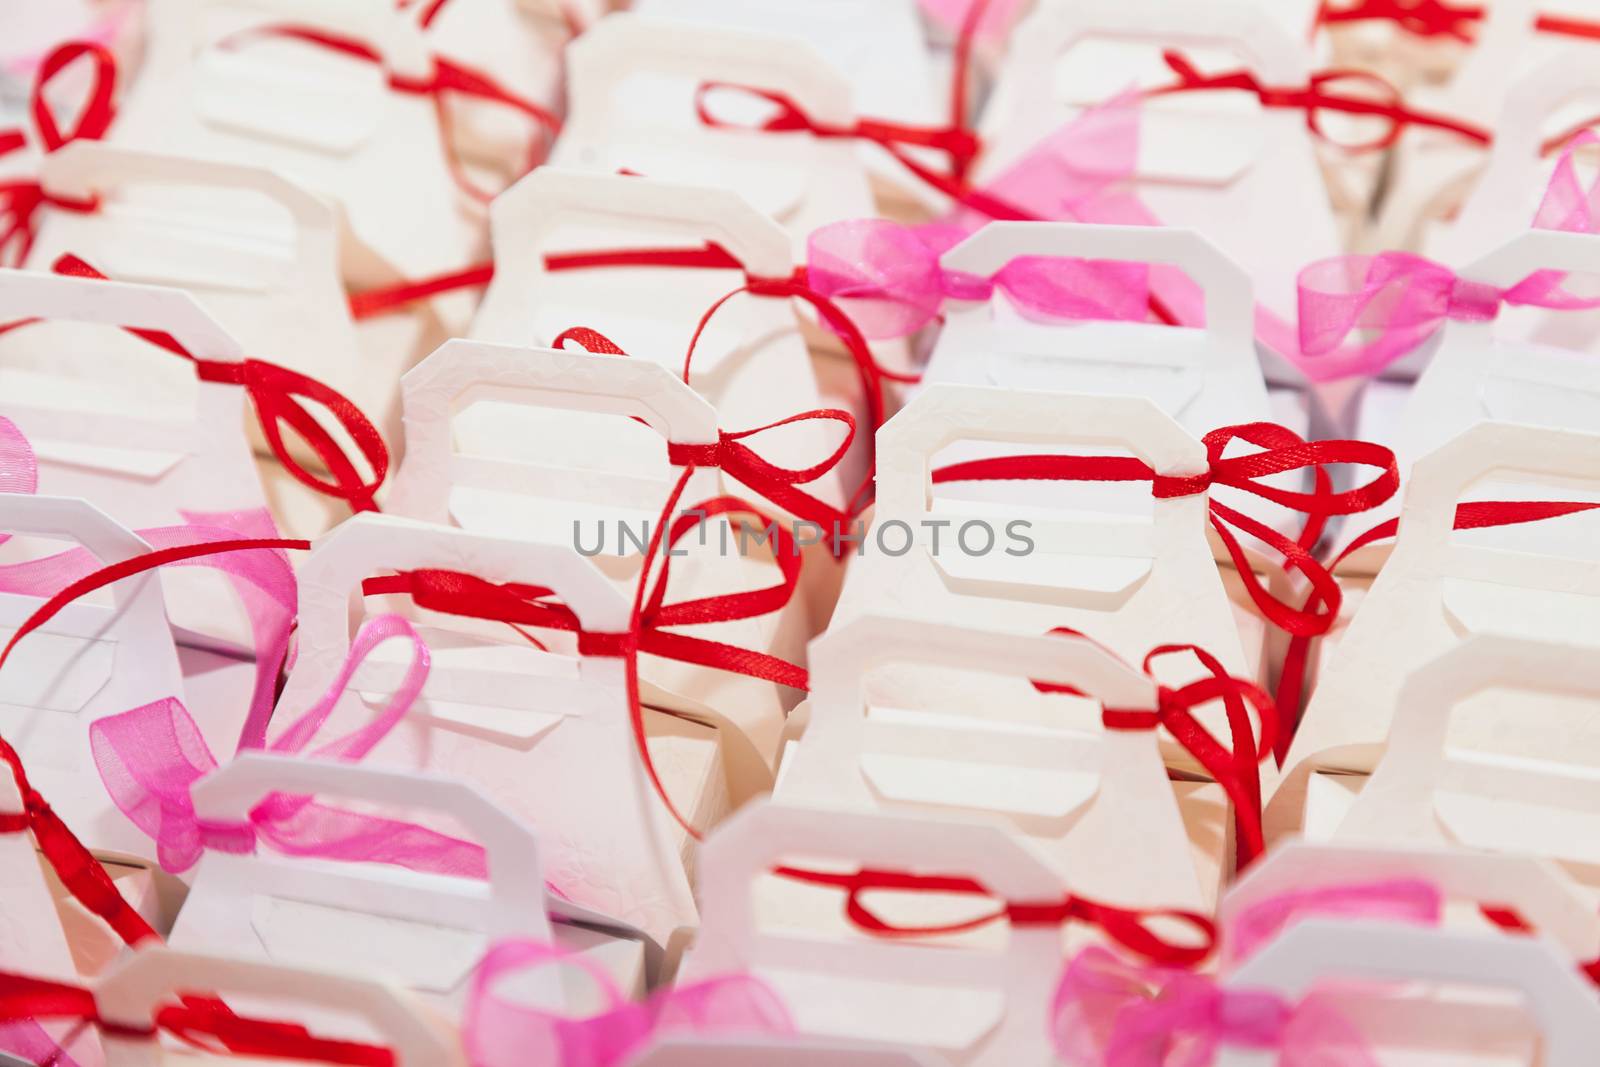 Colorful baptism favors given in baptisms